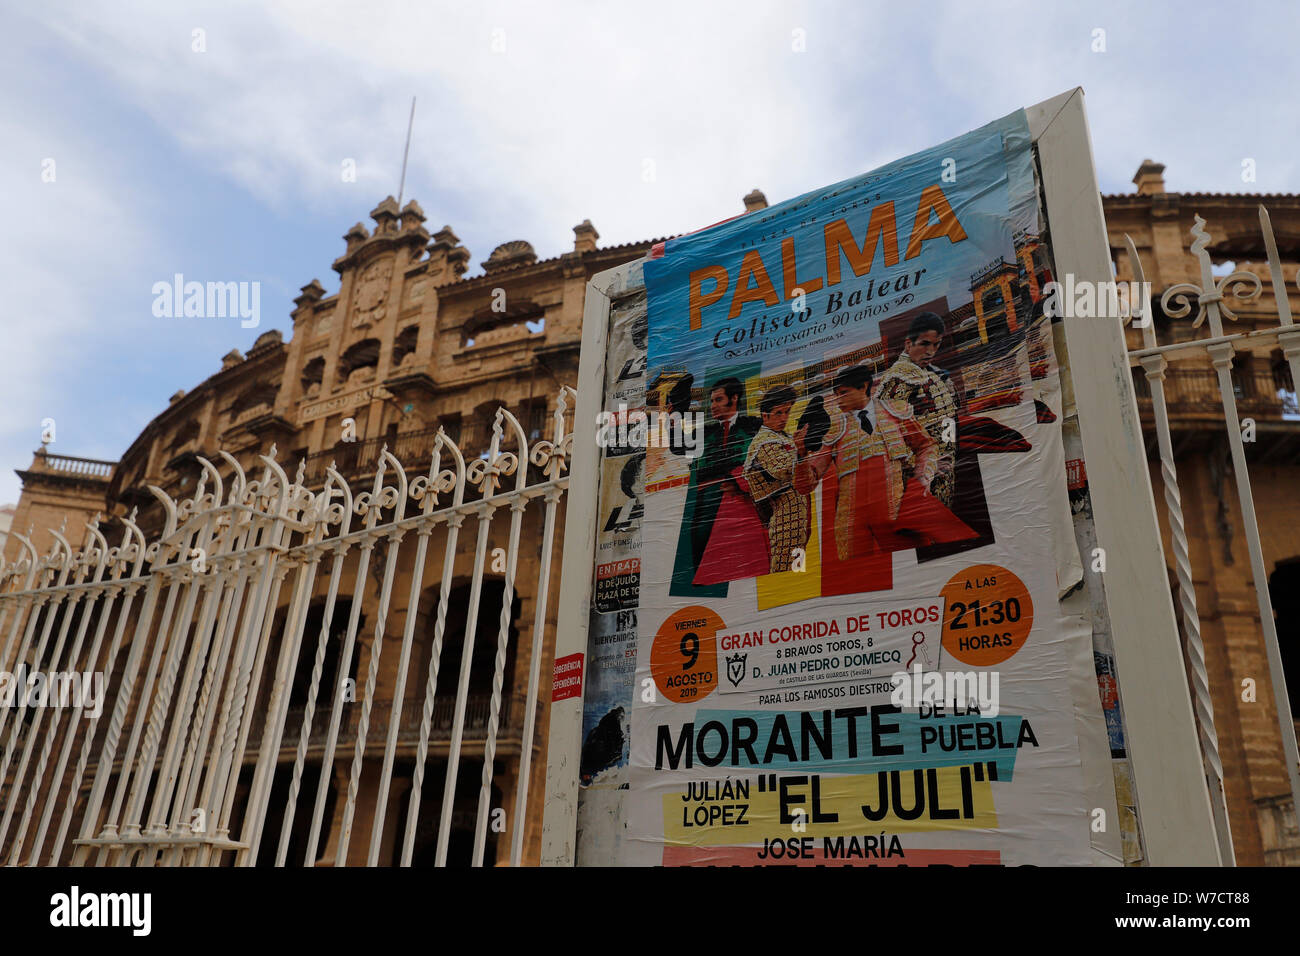 31 July 2019 Spain Palma A Poster Promotes A Bullfight On 09